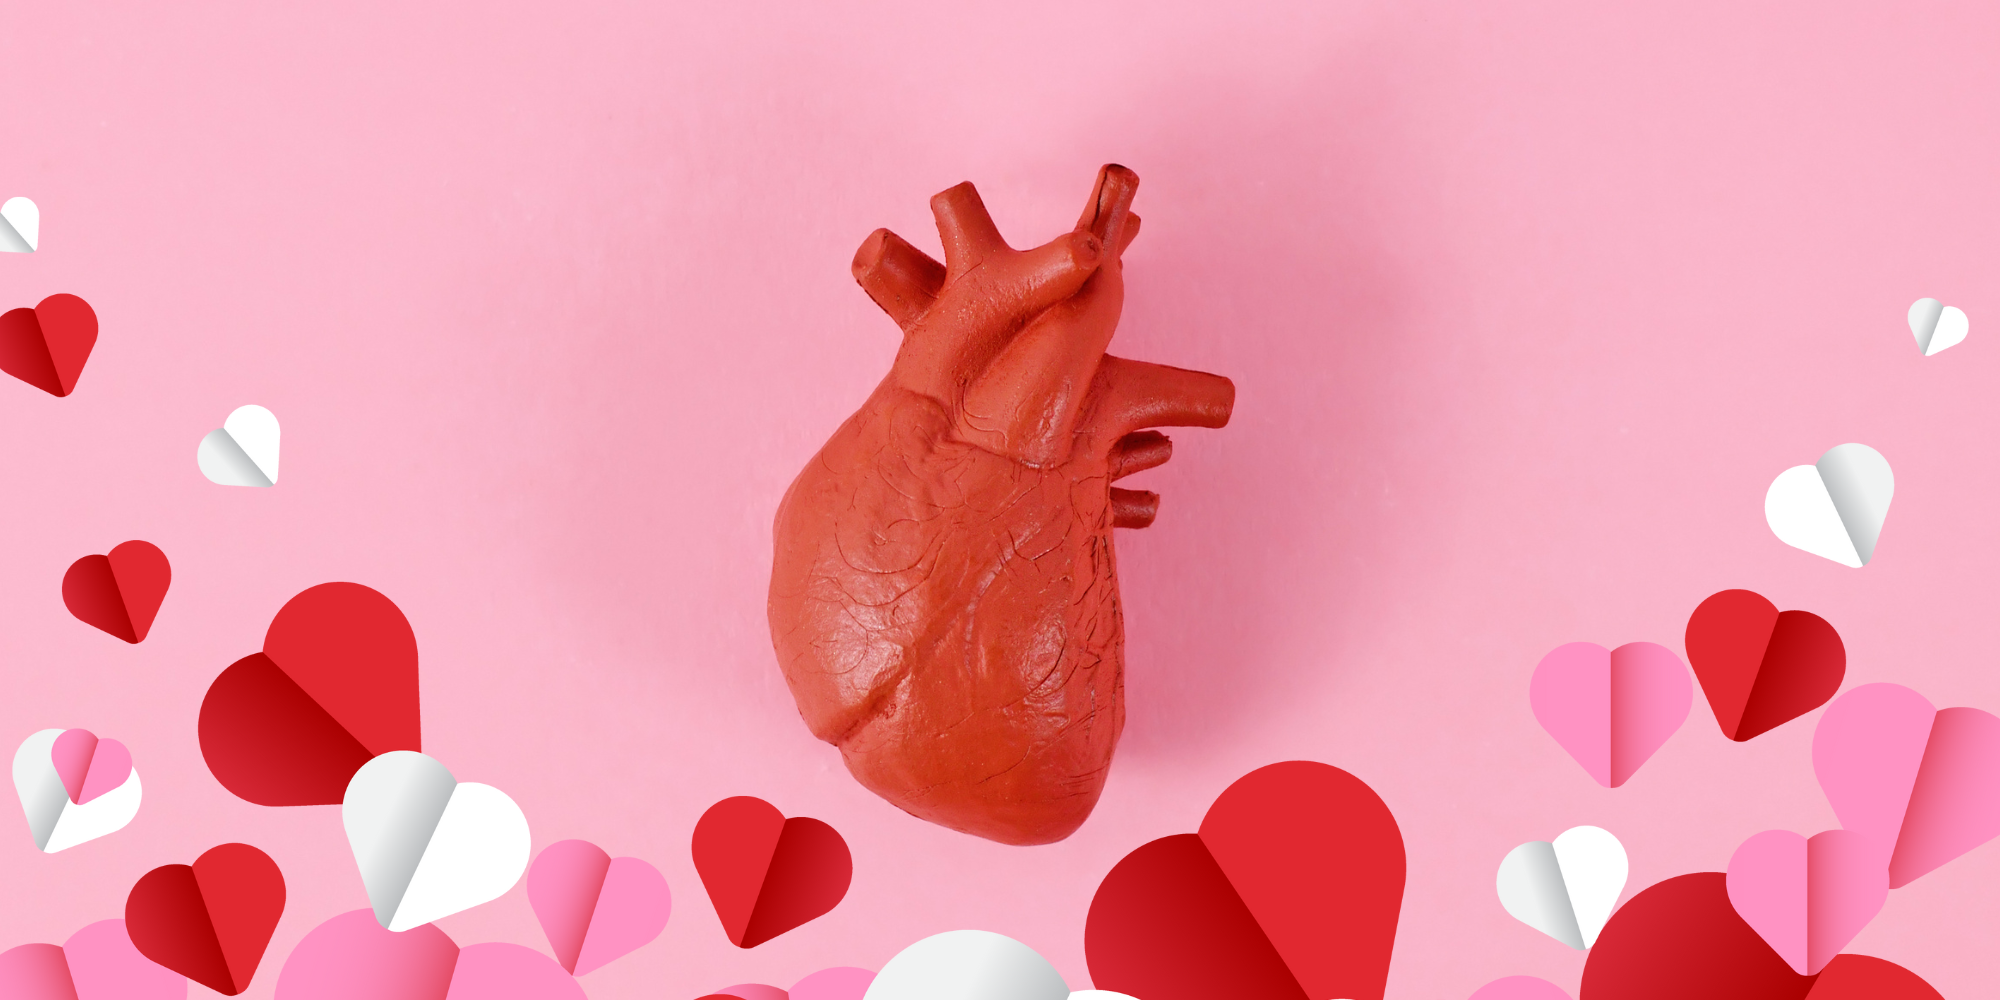 orangy red anitomical heart model surrounded by heart shapes against a pink background. The image looks like a Valentine's Day card for your heart (organ). 